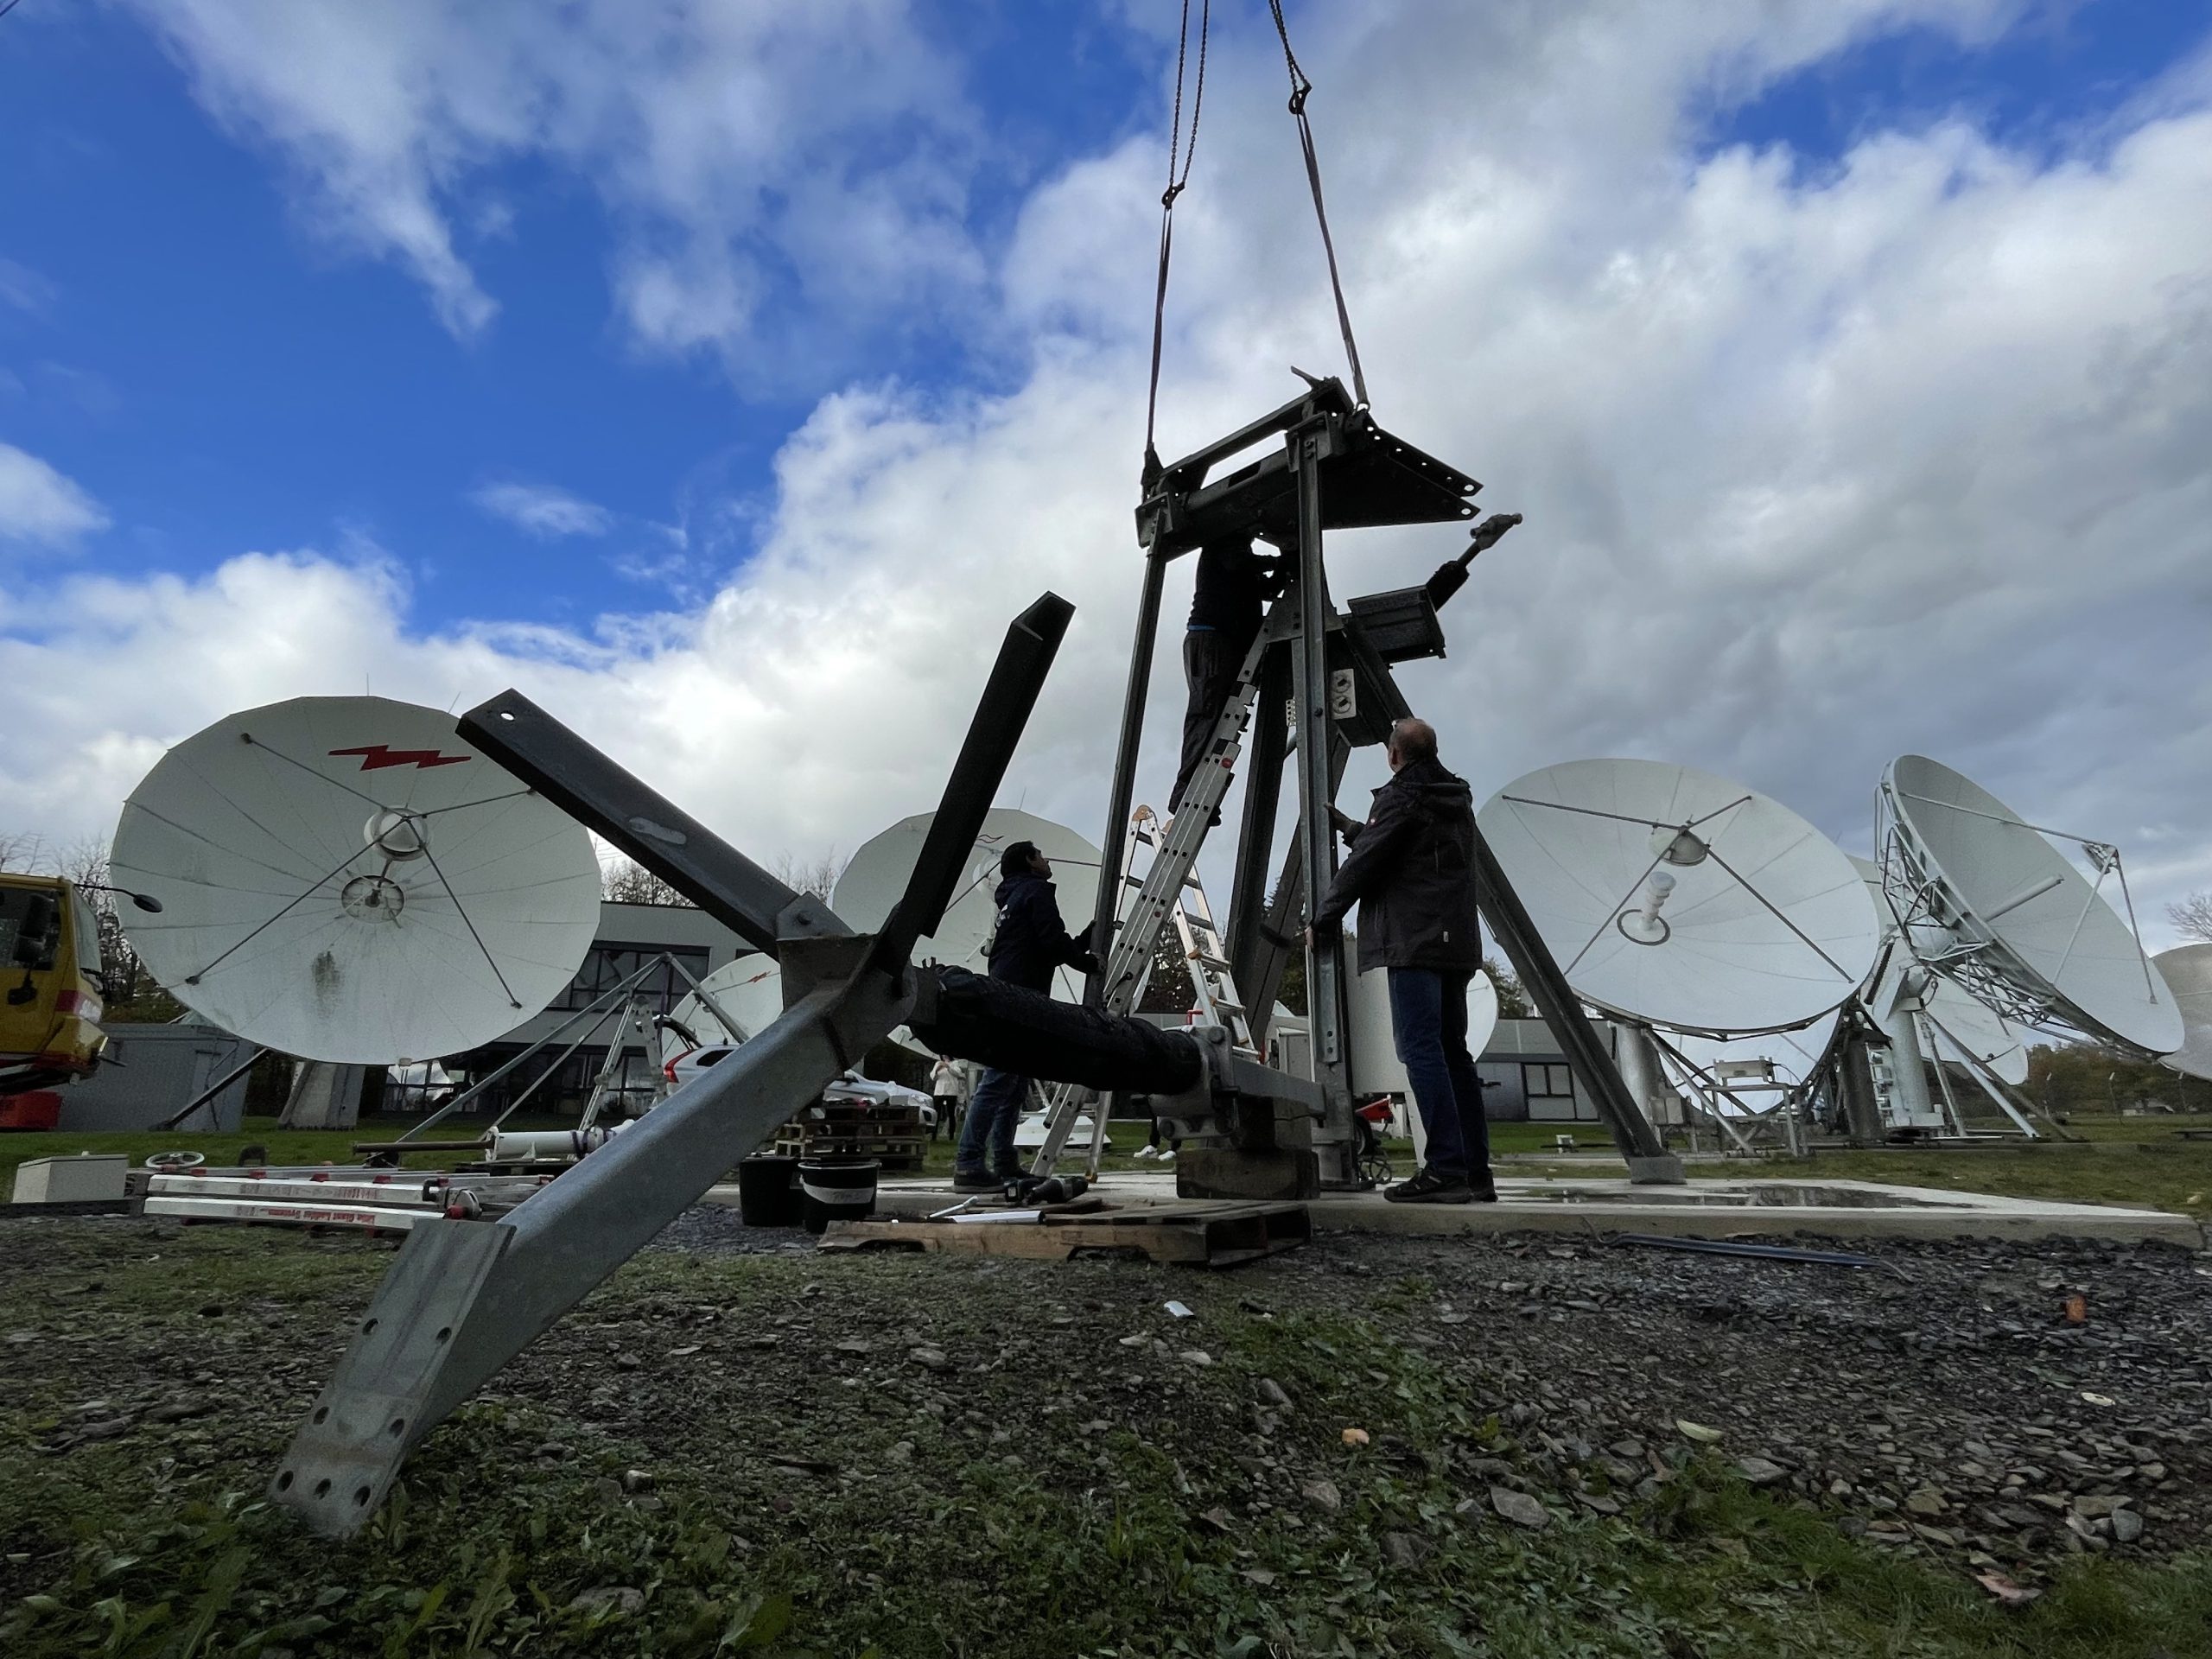 Skybrokers delivered a refurbished 7.6m Satellite antenna to AXESS Networks in Germany